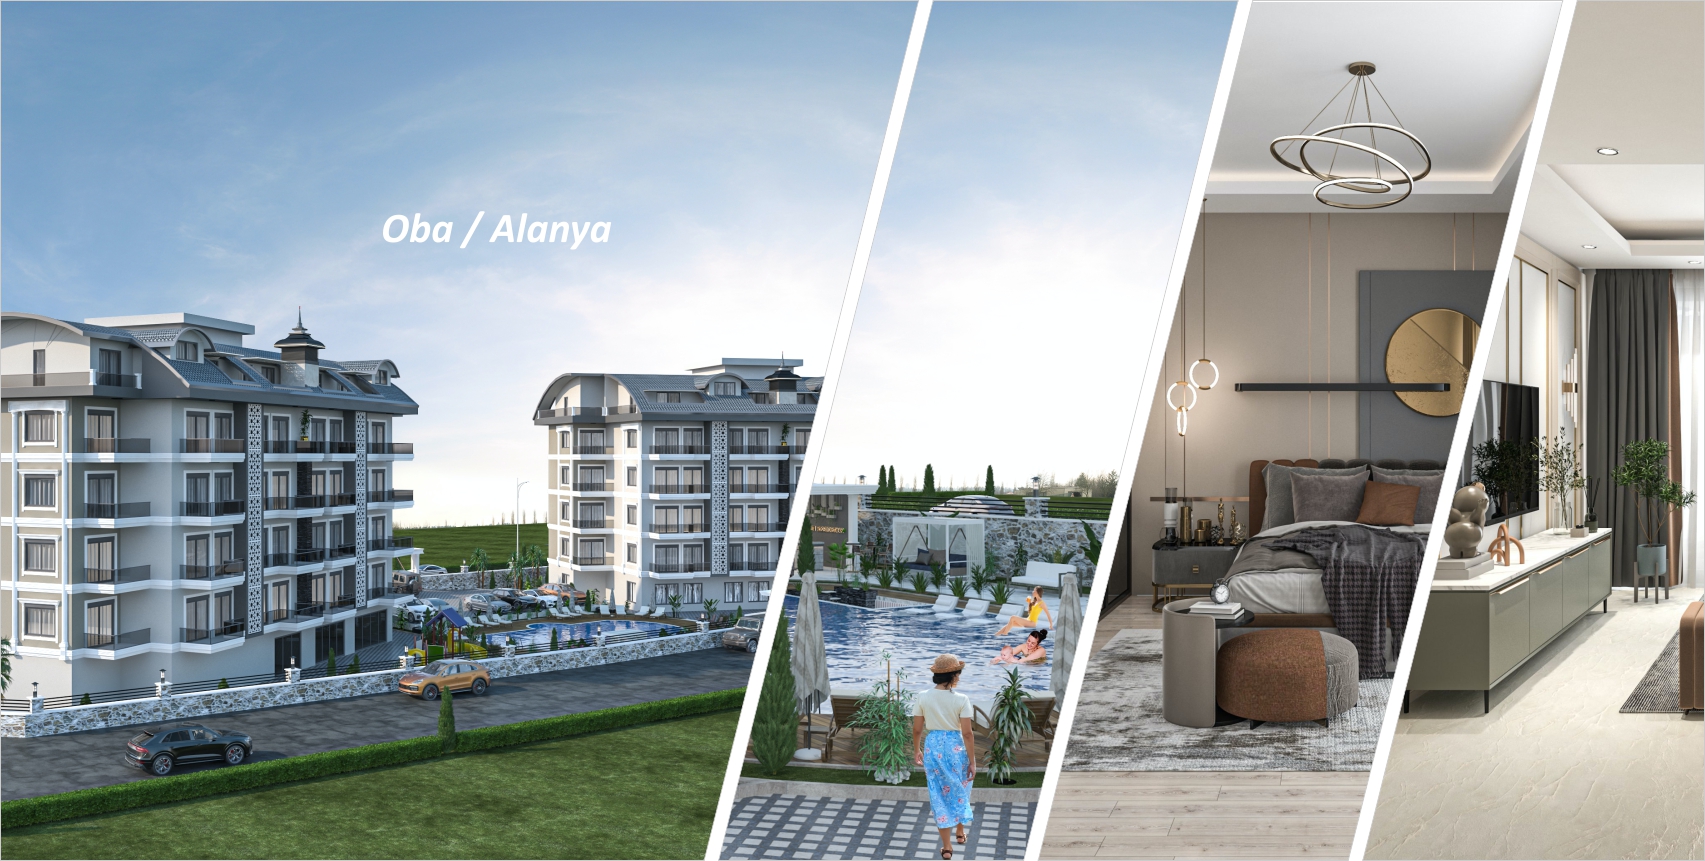 Luxury complex with nature and rich activity in Alanya Oba